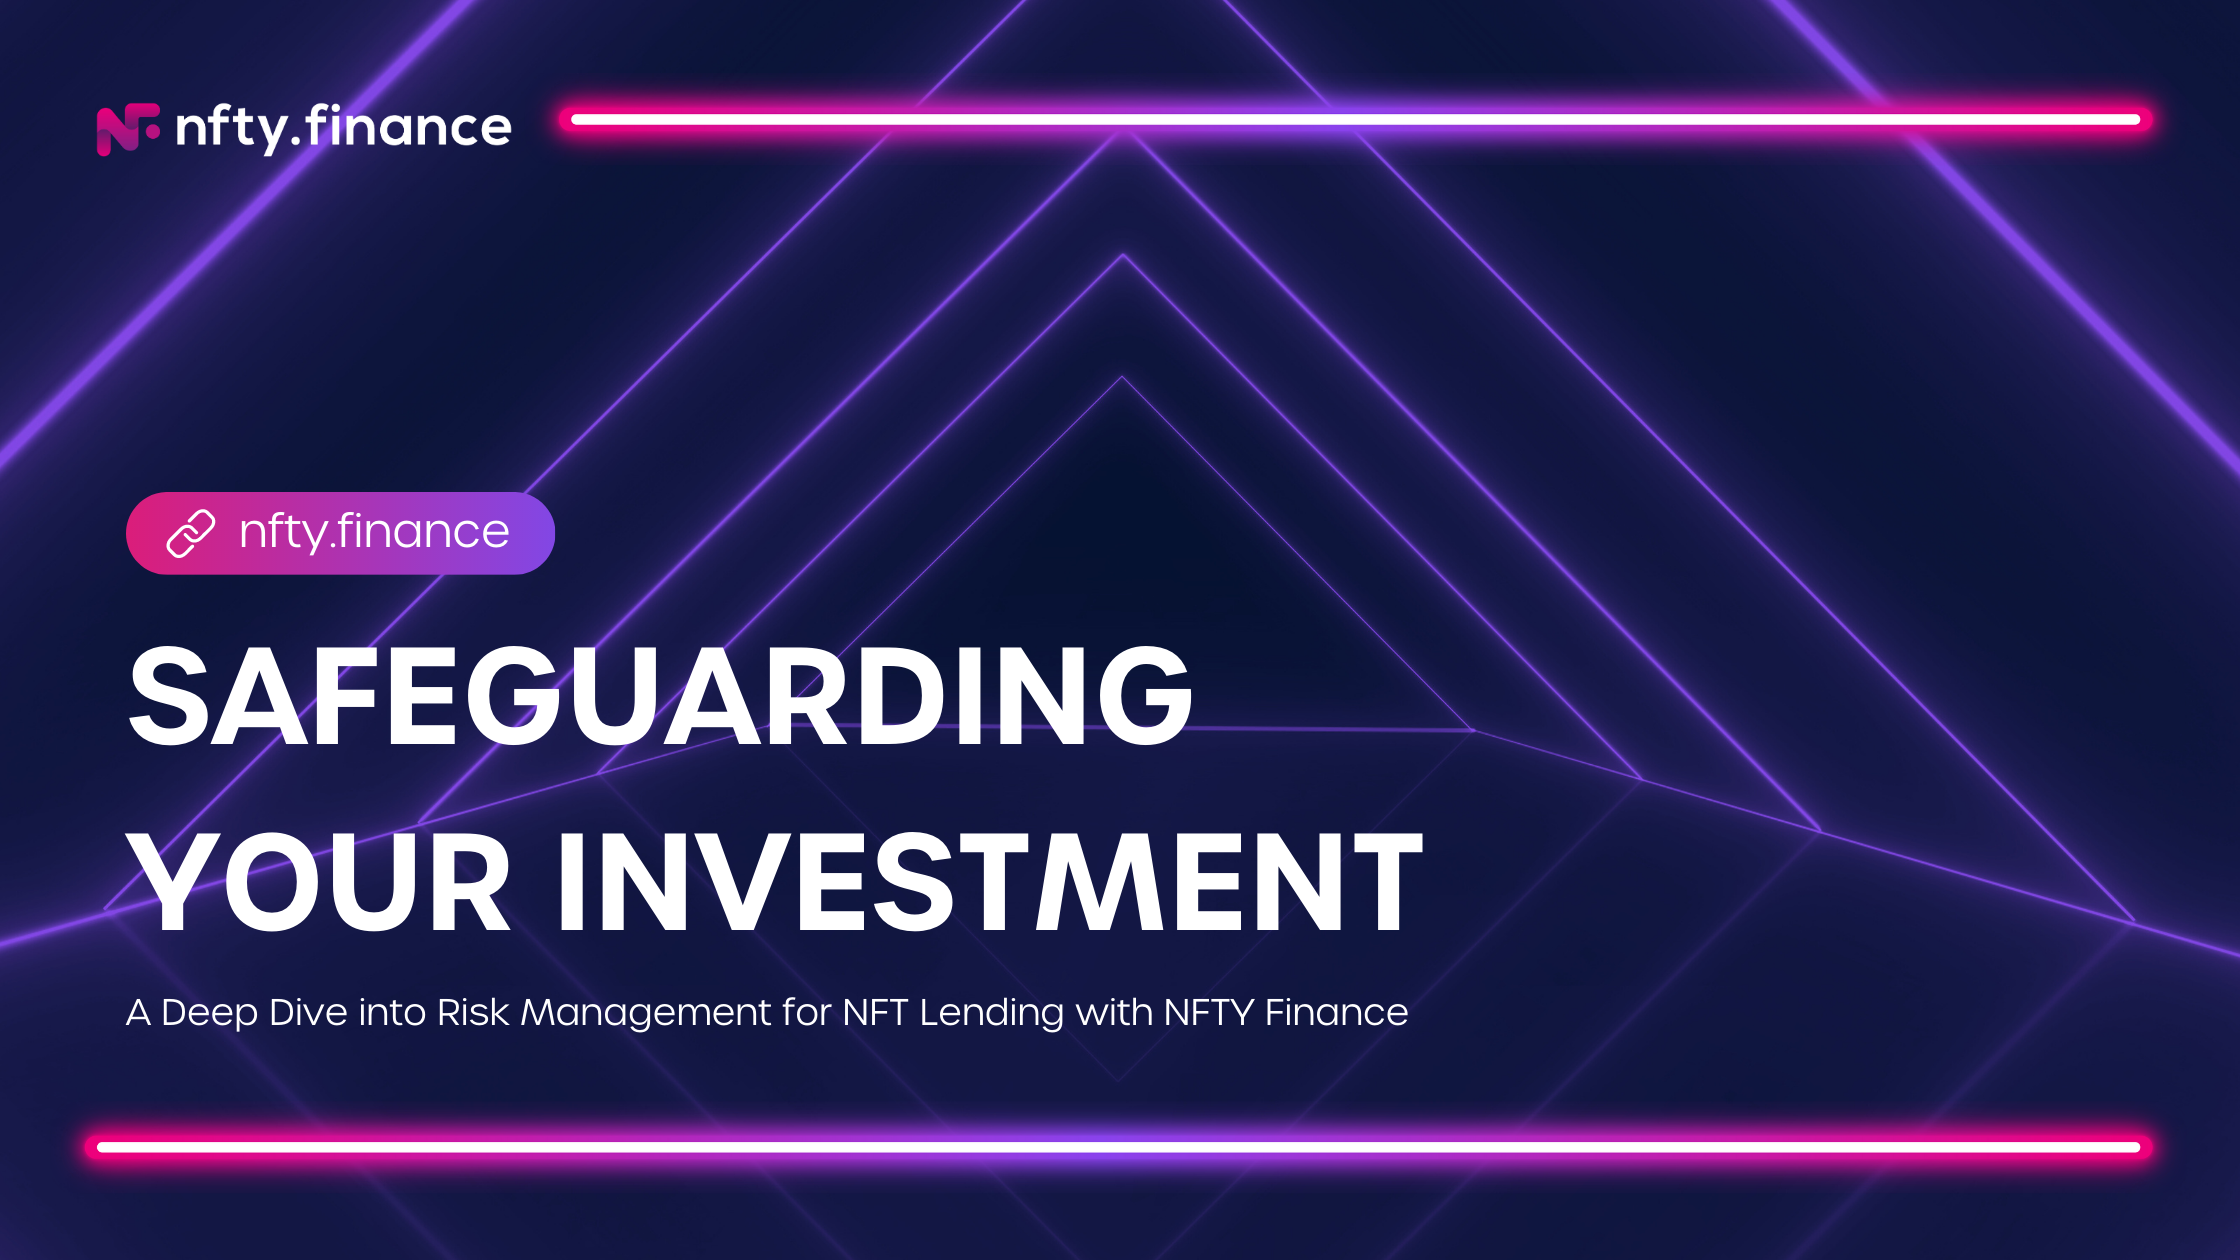 Safeguarding Your Investment: A Deep Dive into Risk Management for NFT Lending with NFTY Finance